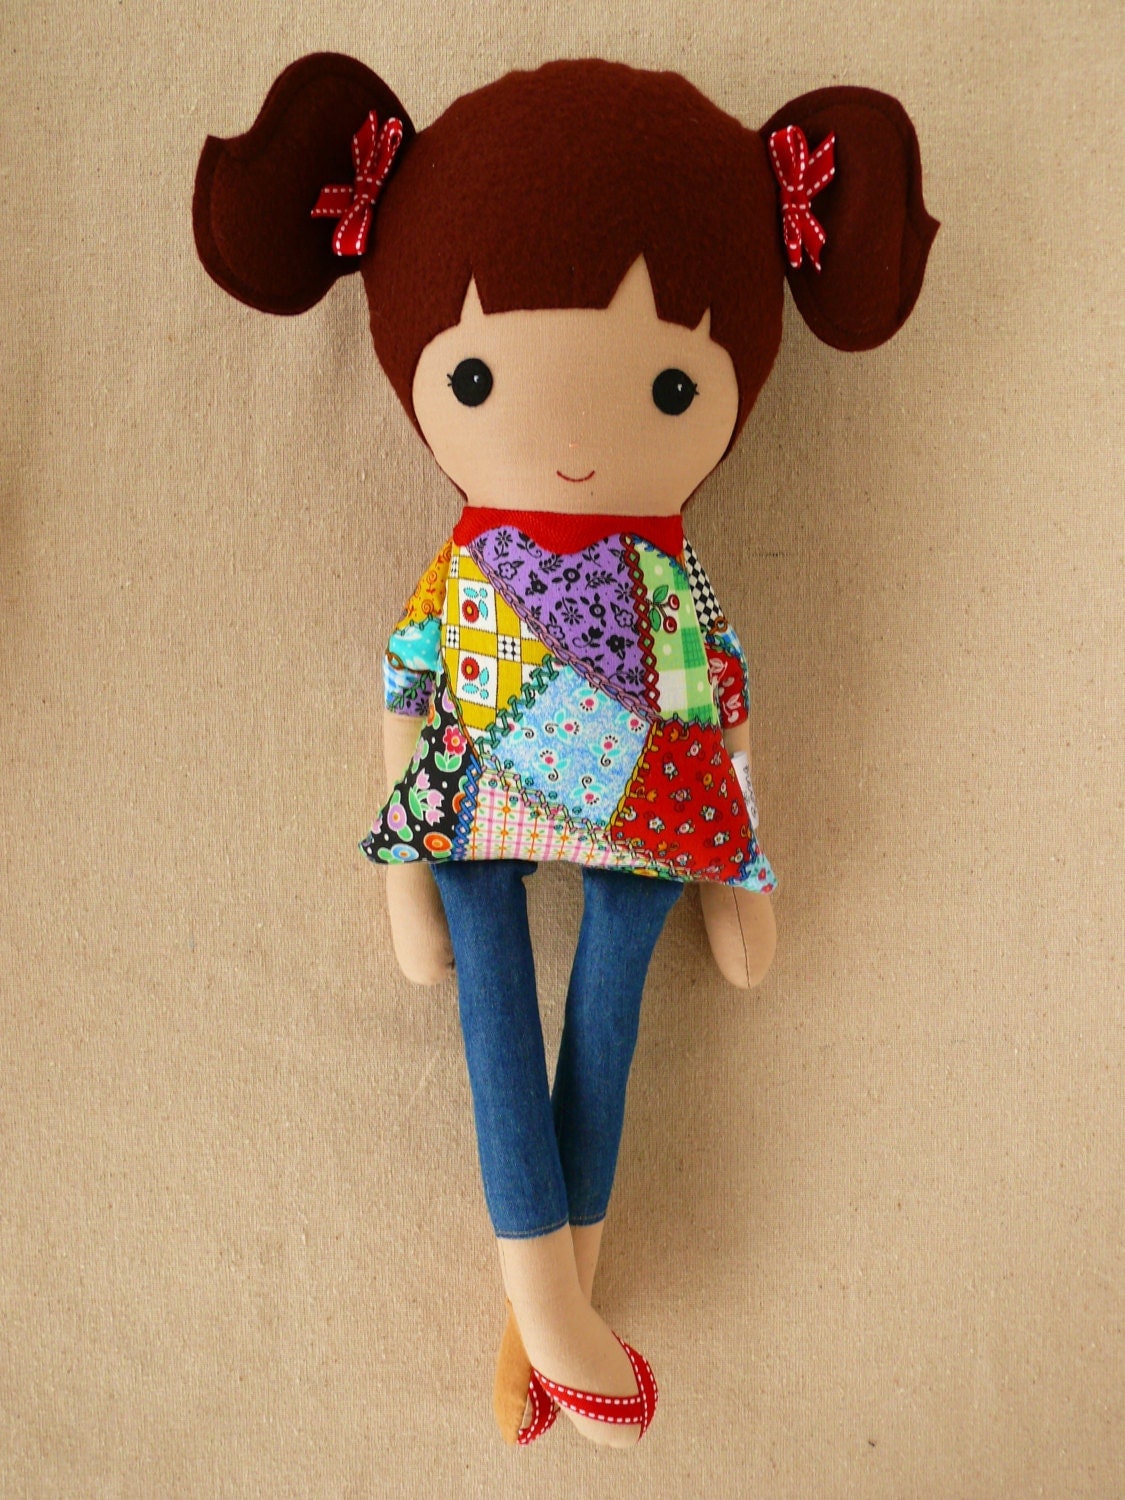  Fabric  Doll  Rag Doll  Girl in Patchwork Dress and Ponytails